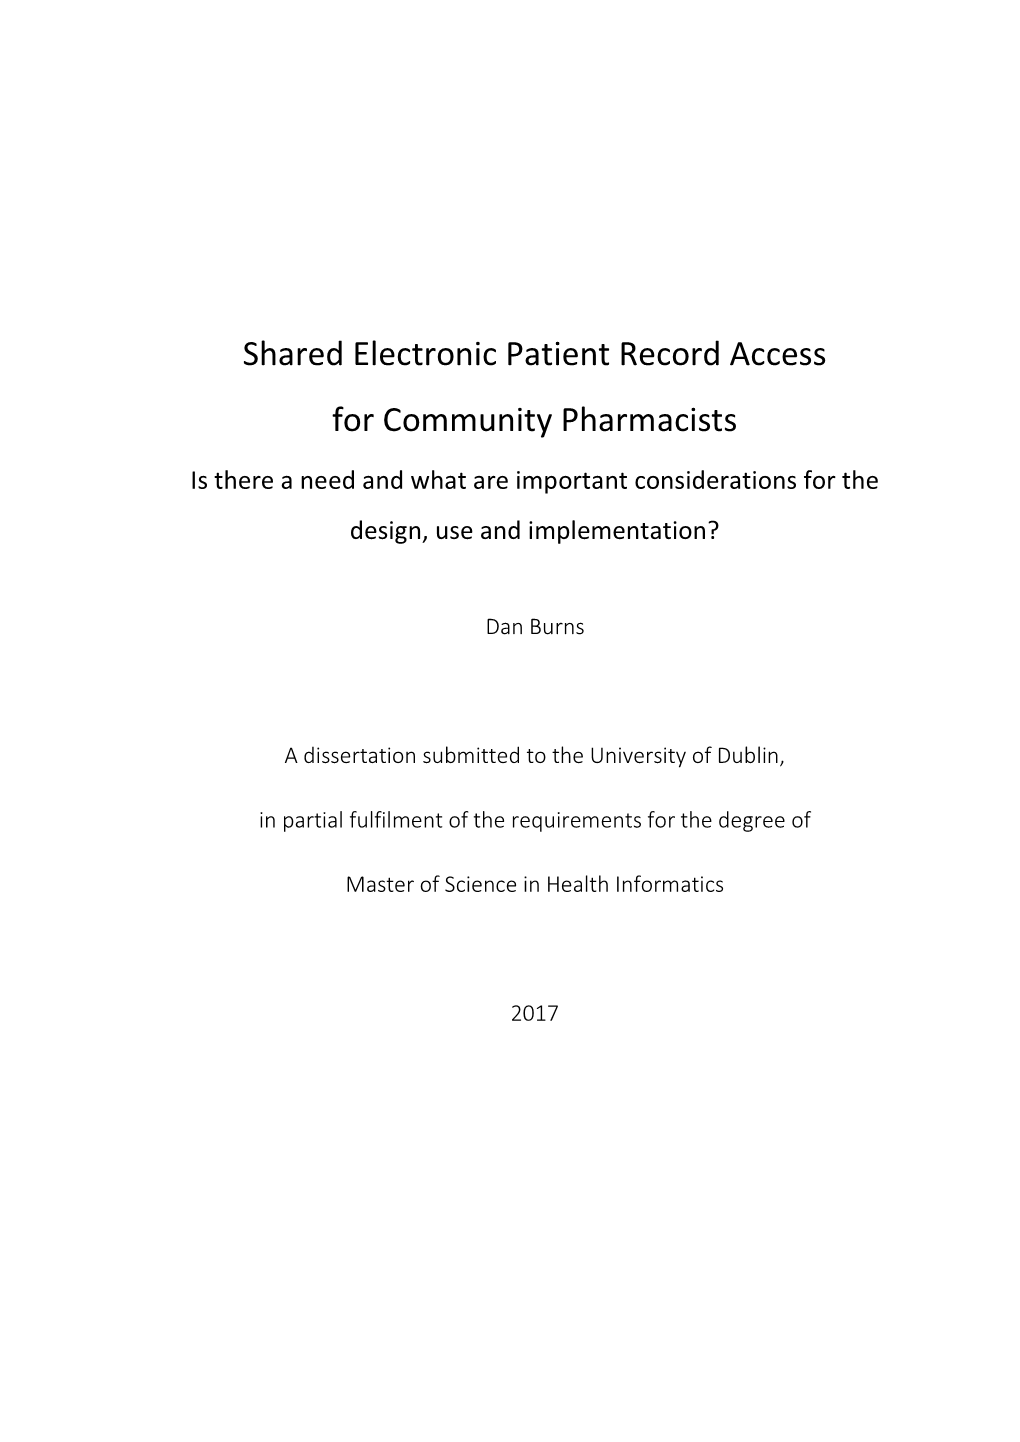 Shared Electronic Patient Record Access for Community Pharmacists